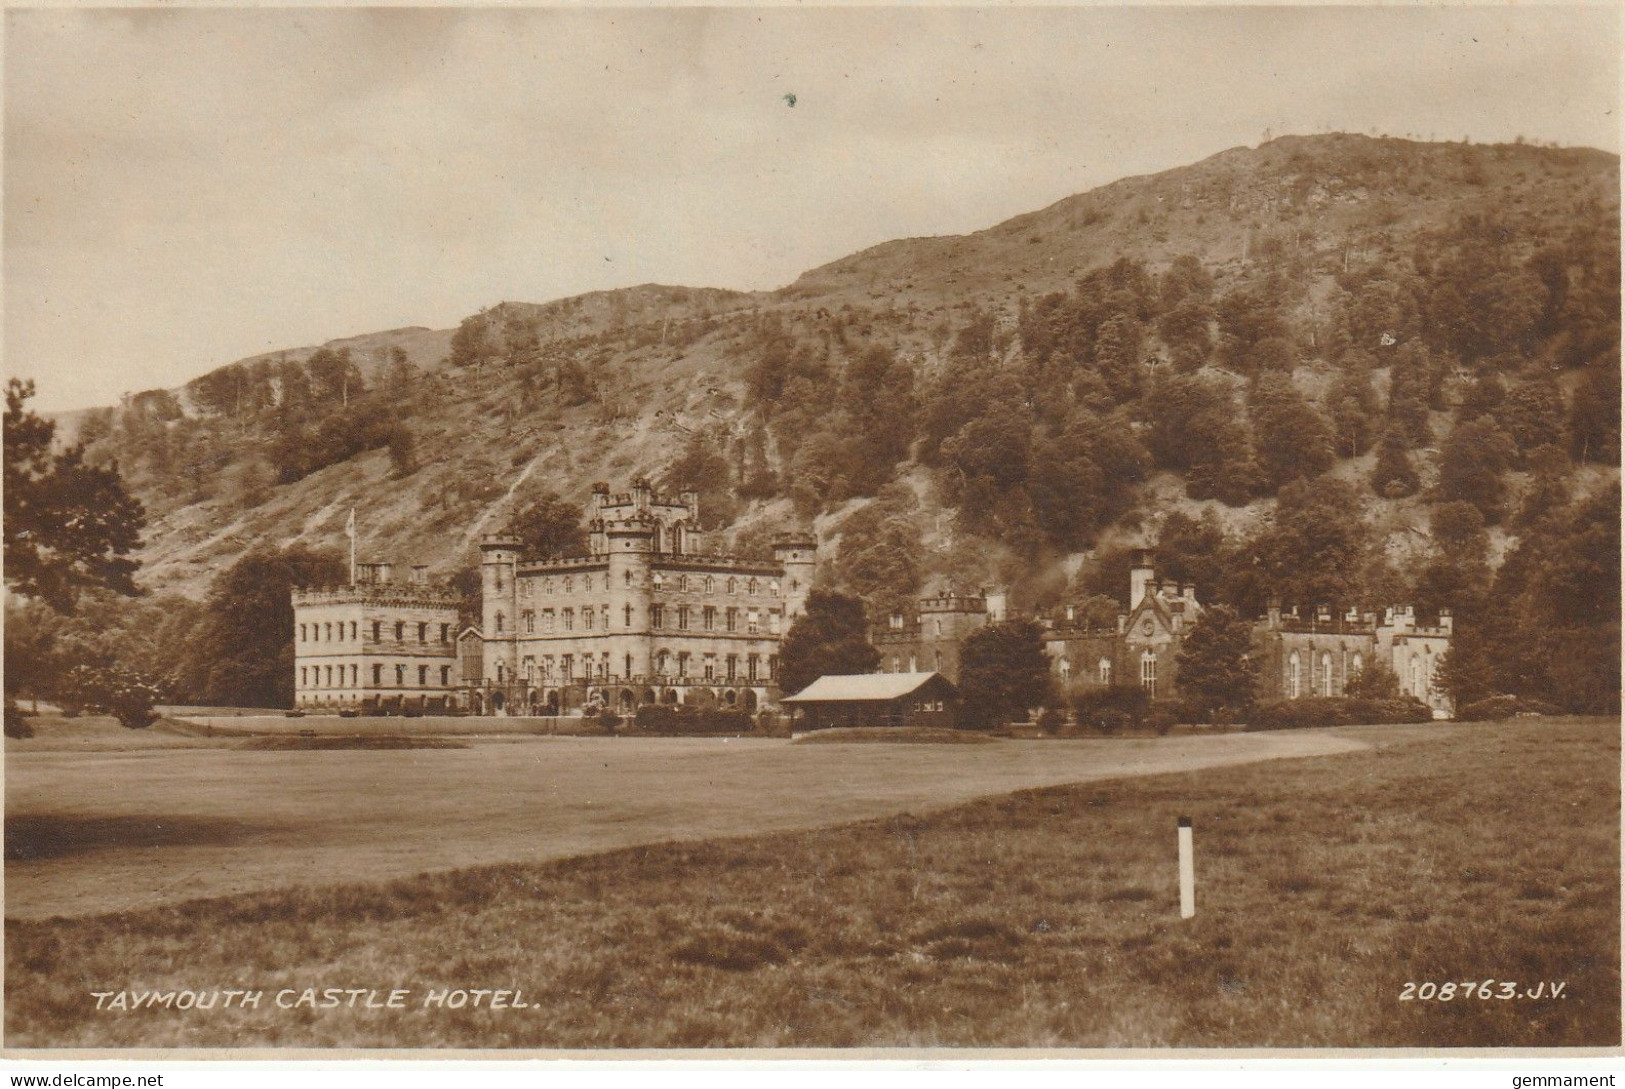 TAYMOUTH CASTLE HOTEL - Perthshire